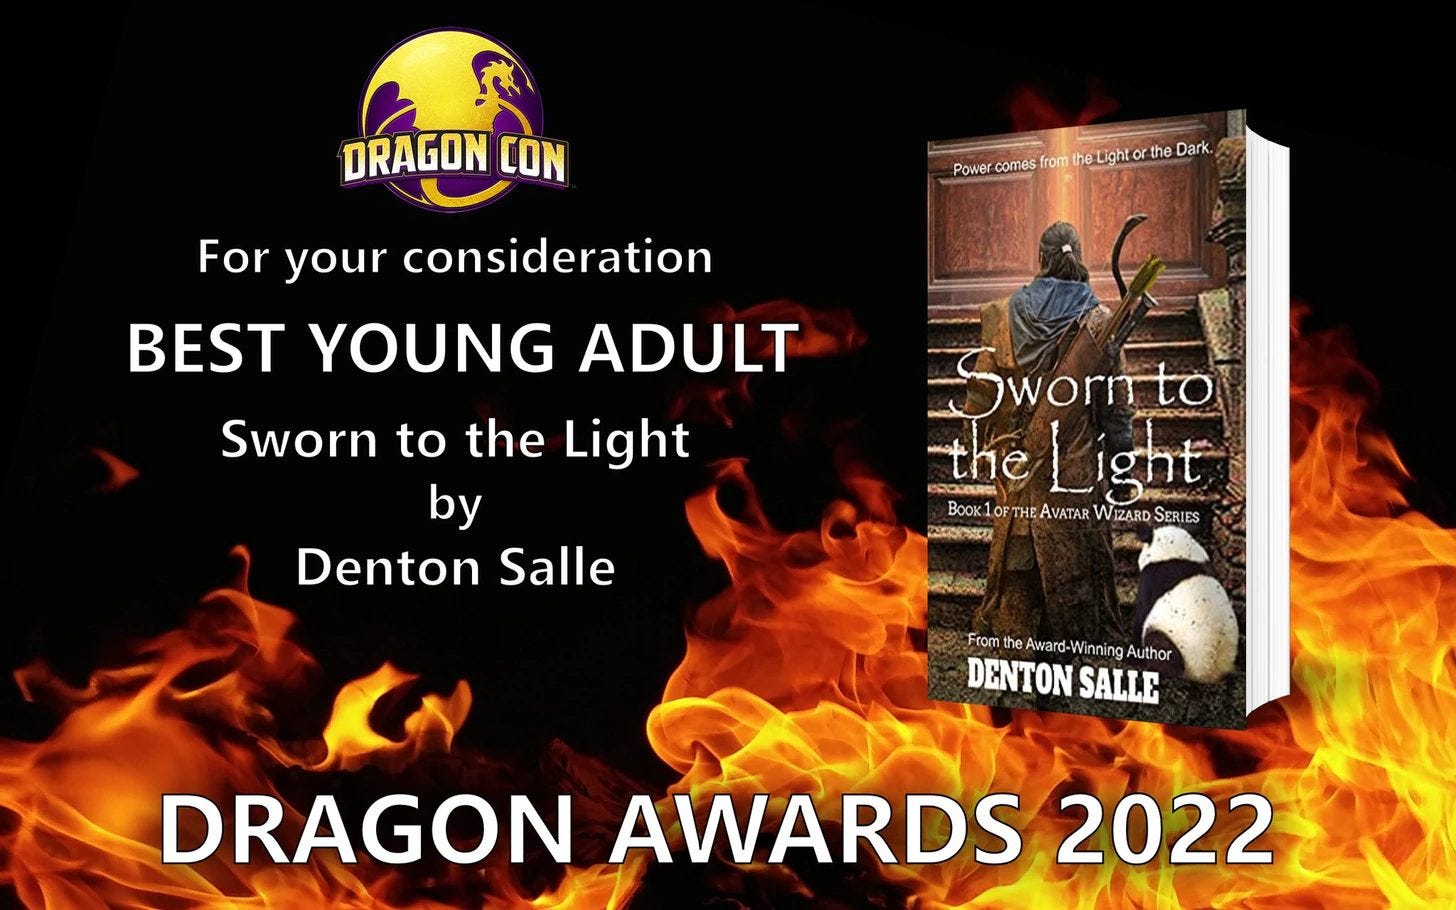 May be a cartoon of fire and text that says 'DRAGON CON Poe.sothLit Power comes from the Dark. For your consideration BEST YOUNG ADULT Sworn to the Light by Denton Salle Swornto the Light Book1 FTH AVATAR WIZARD ERIES ಮುಕಸಿಜಲ್ From Award- Winning Author DENTON SALLE DRAGON AWARDS 2022'